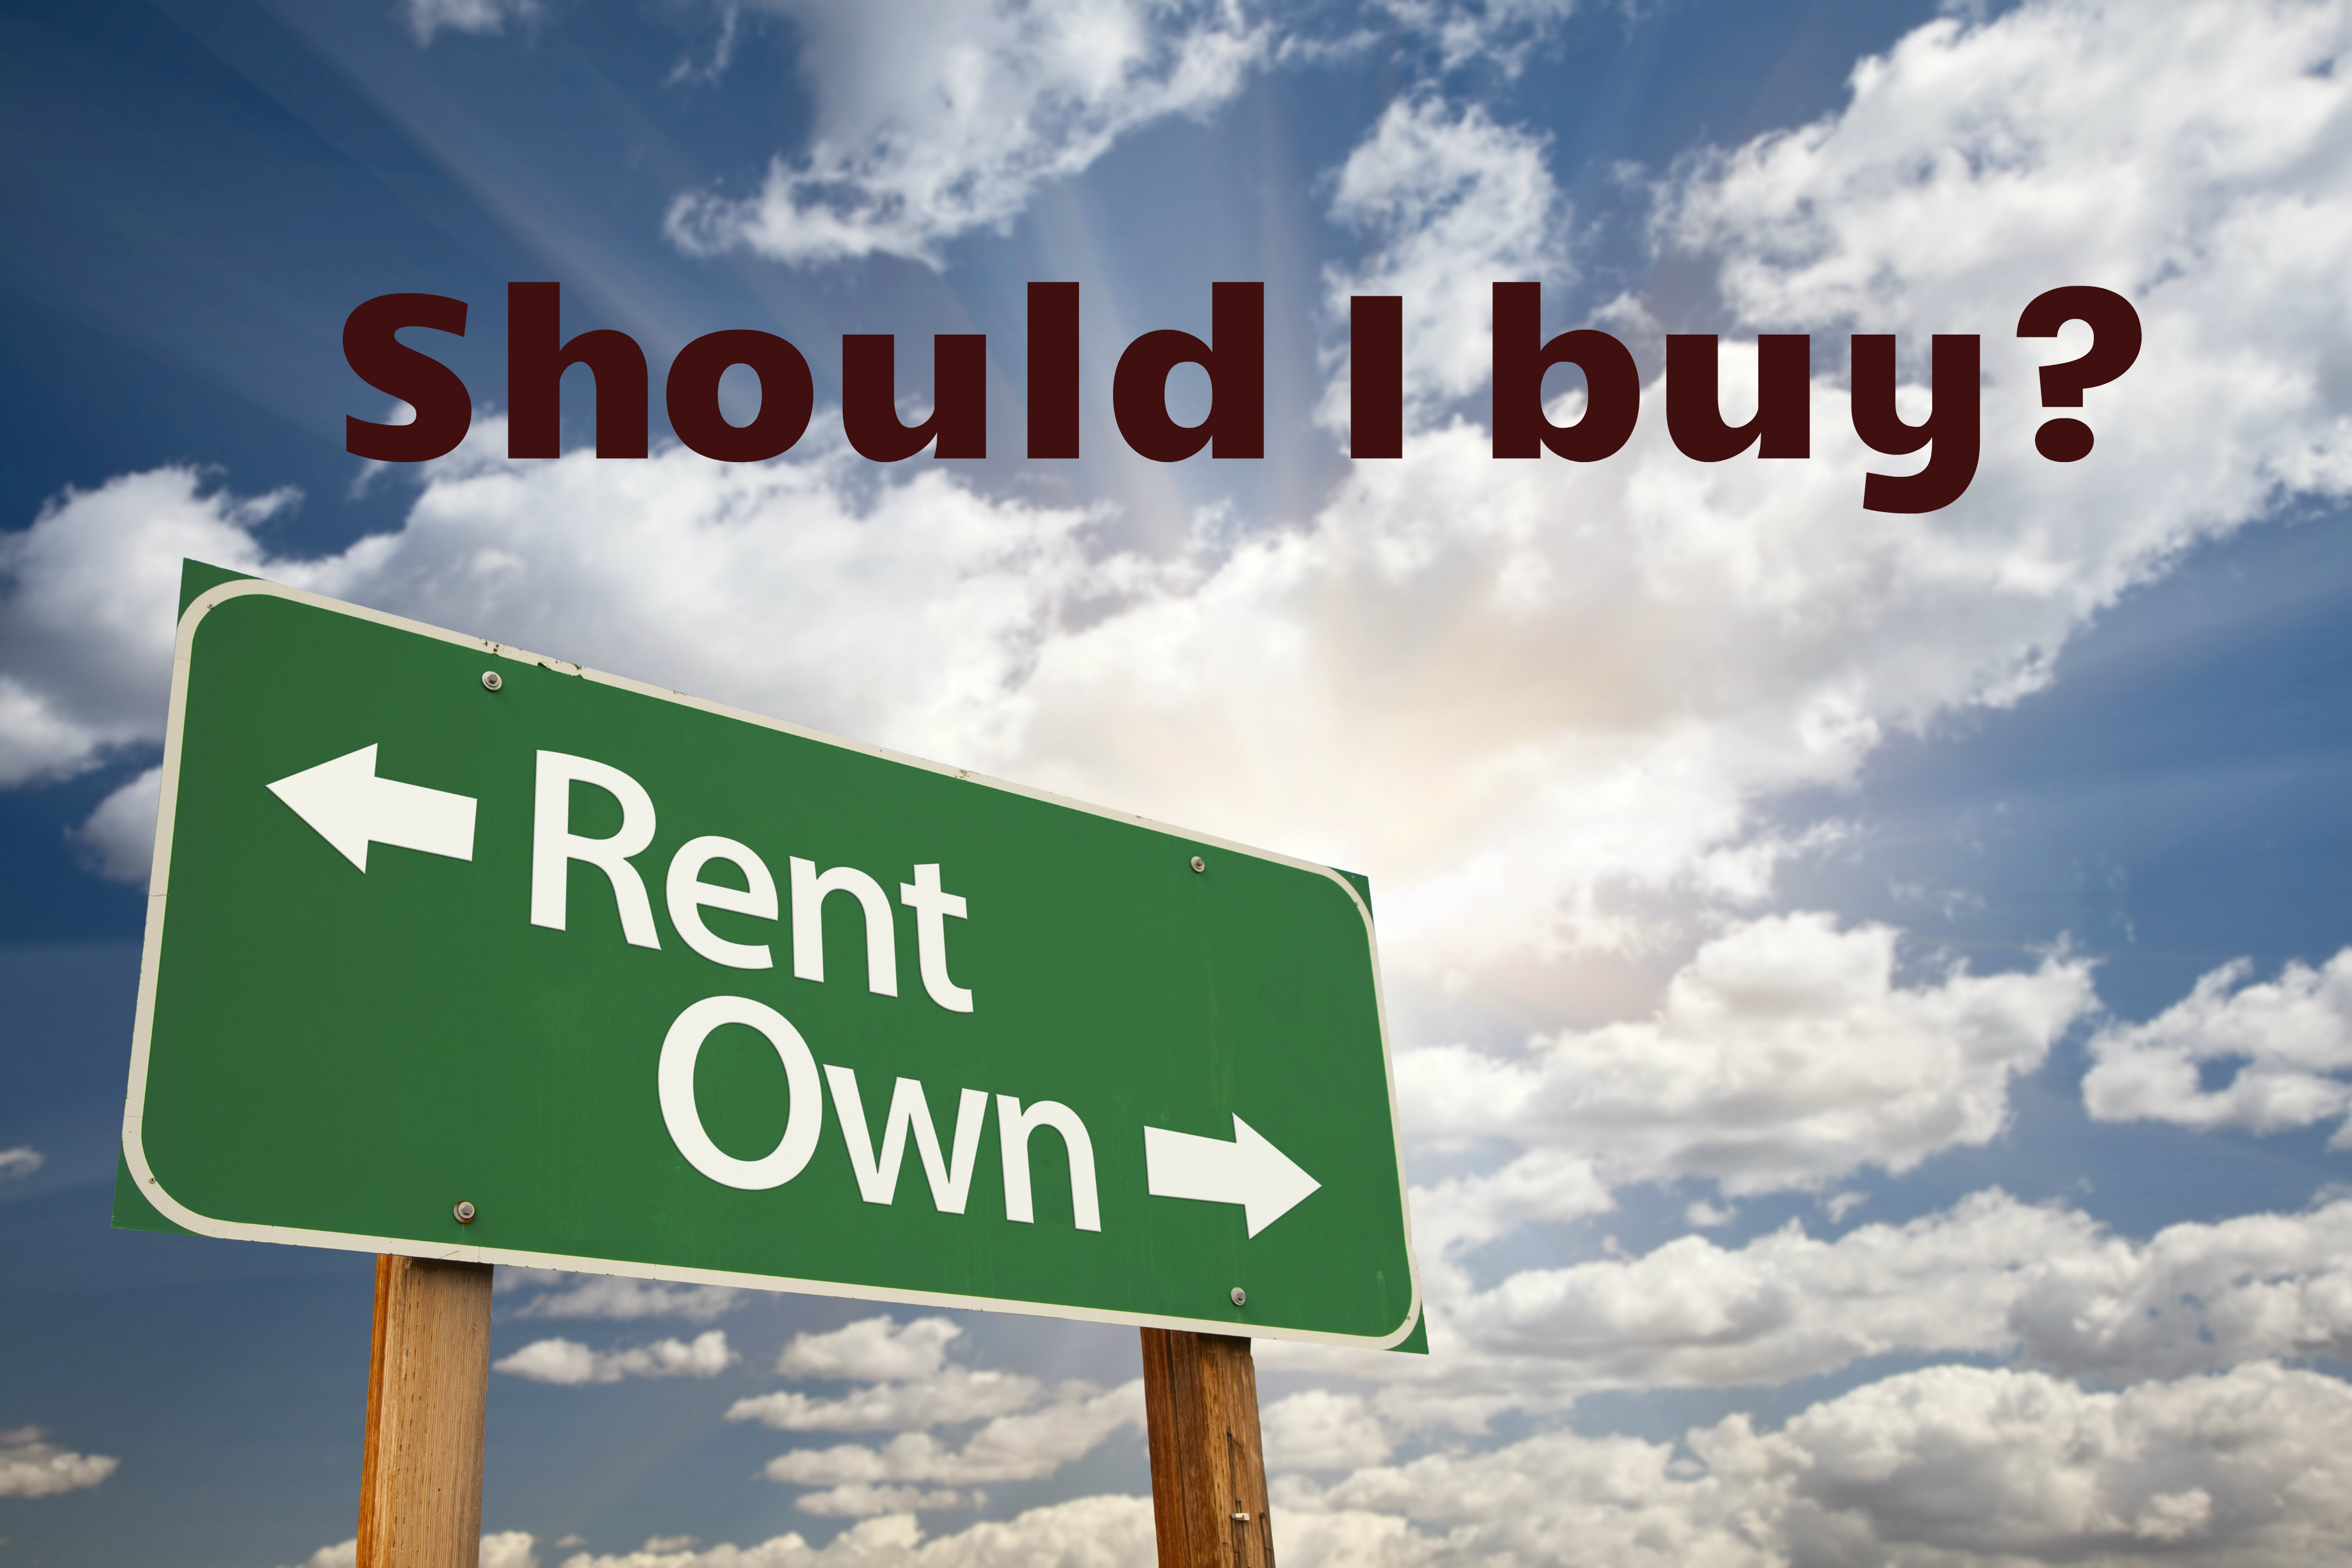 How Does Increasing Rents Make Home Ownership More Appealing?